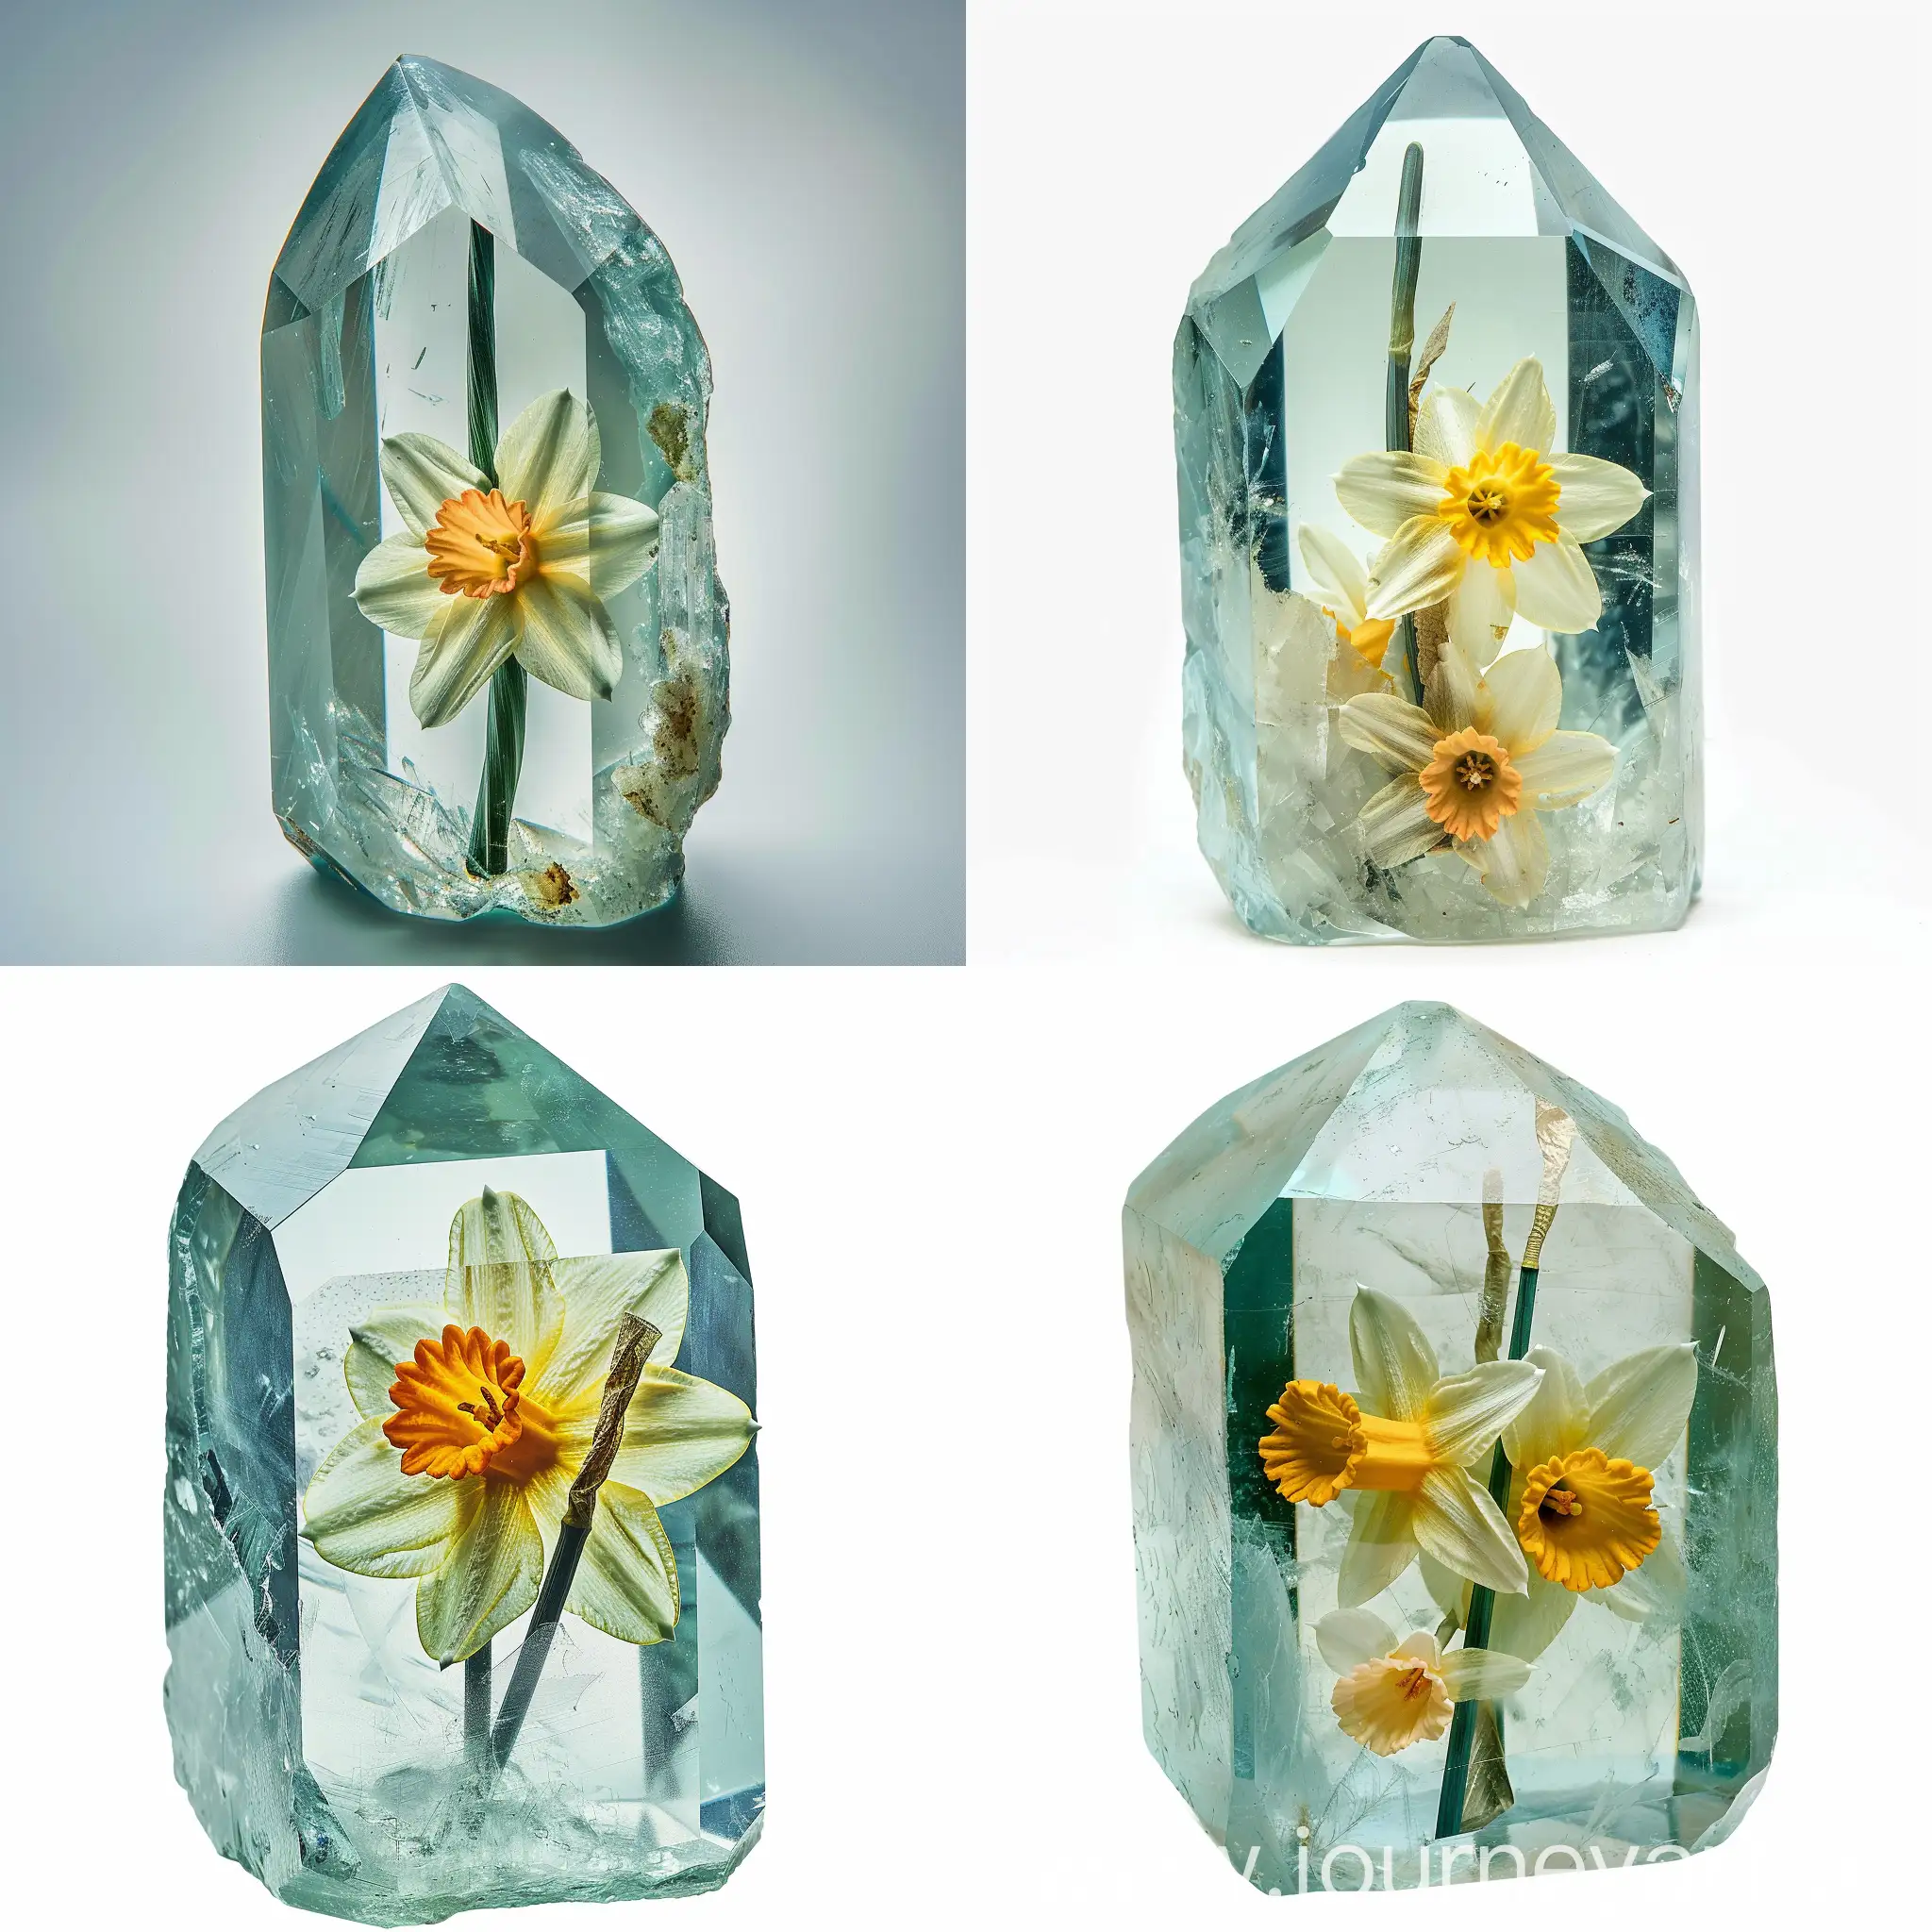 clear aquamarine crystal, with a stalk of pressed daffodil flower inside the crystal, in high quality flat style